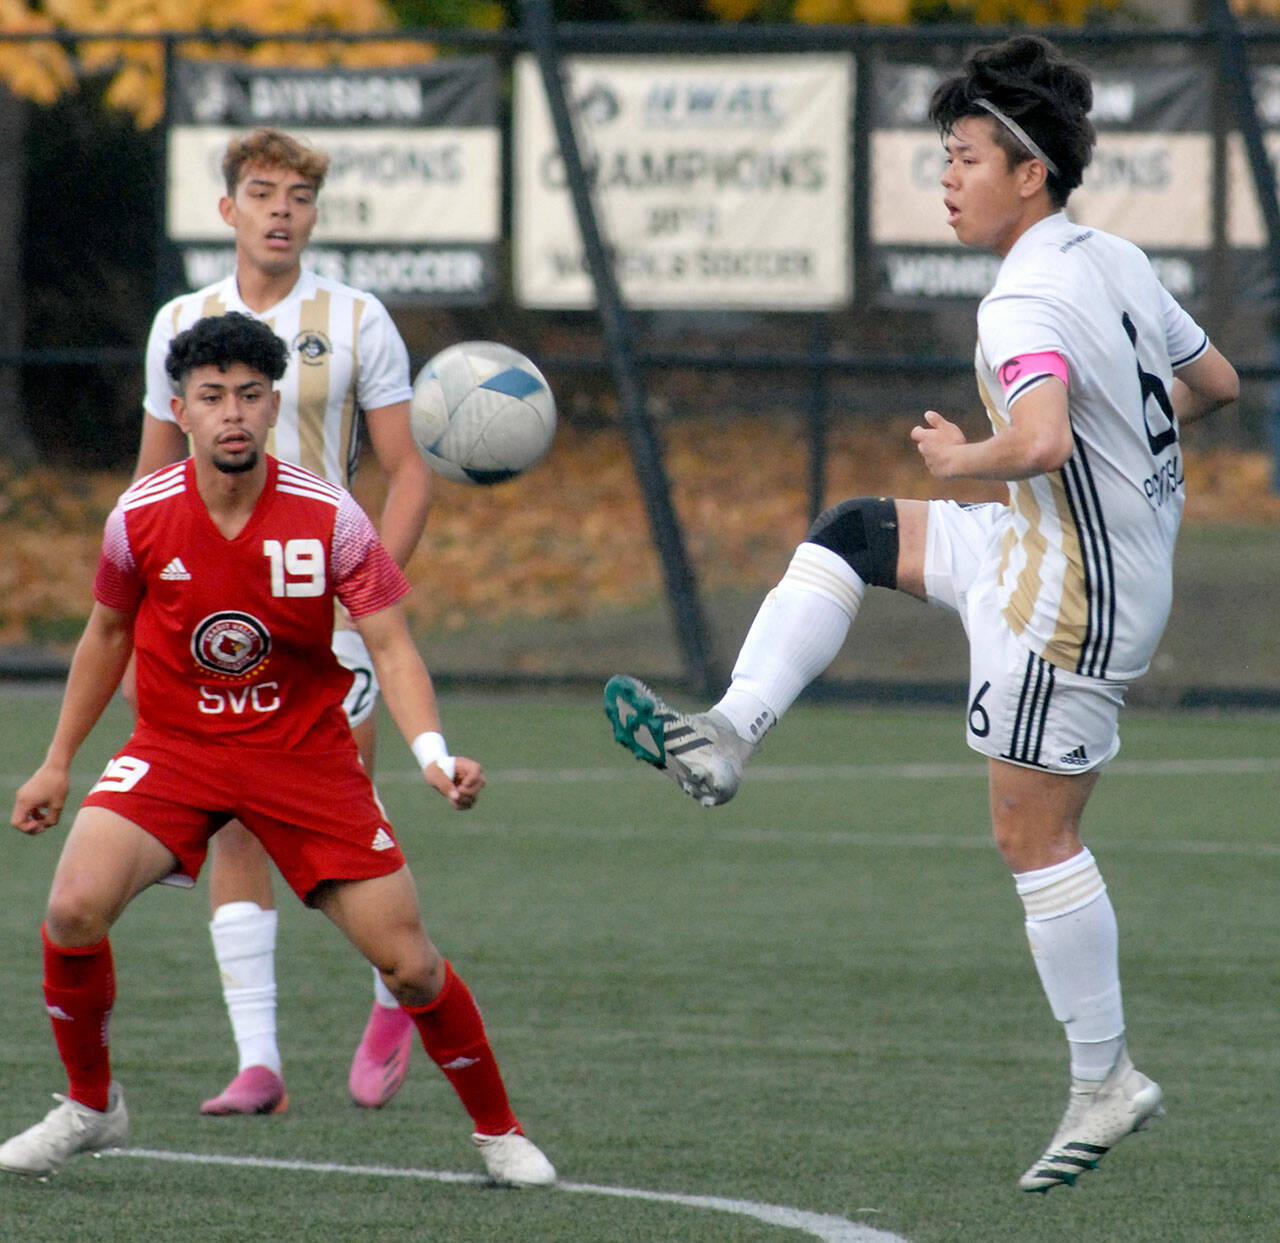 Peninsula’s Jeong Hyun Kang, right, gets in a high kick as Skagit Valley’s Sergio Garduno Mendez, left, and teammate Christopher Dominguez look on during an Oct. 20 match in Port Angeles. Photo by Keith Thorpe/Olympic Peninsula News Group